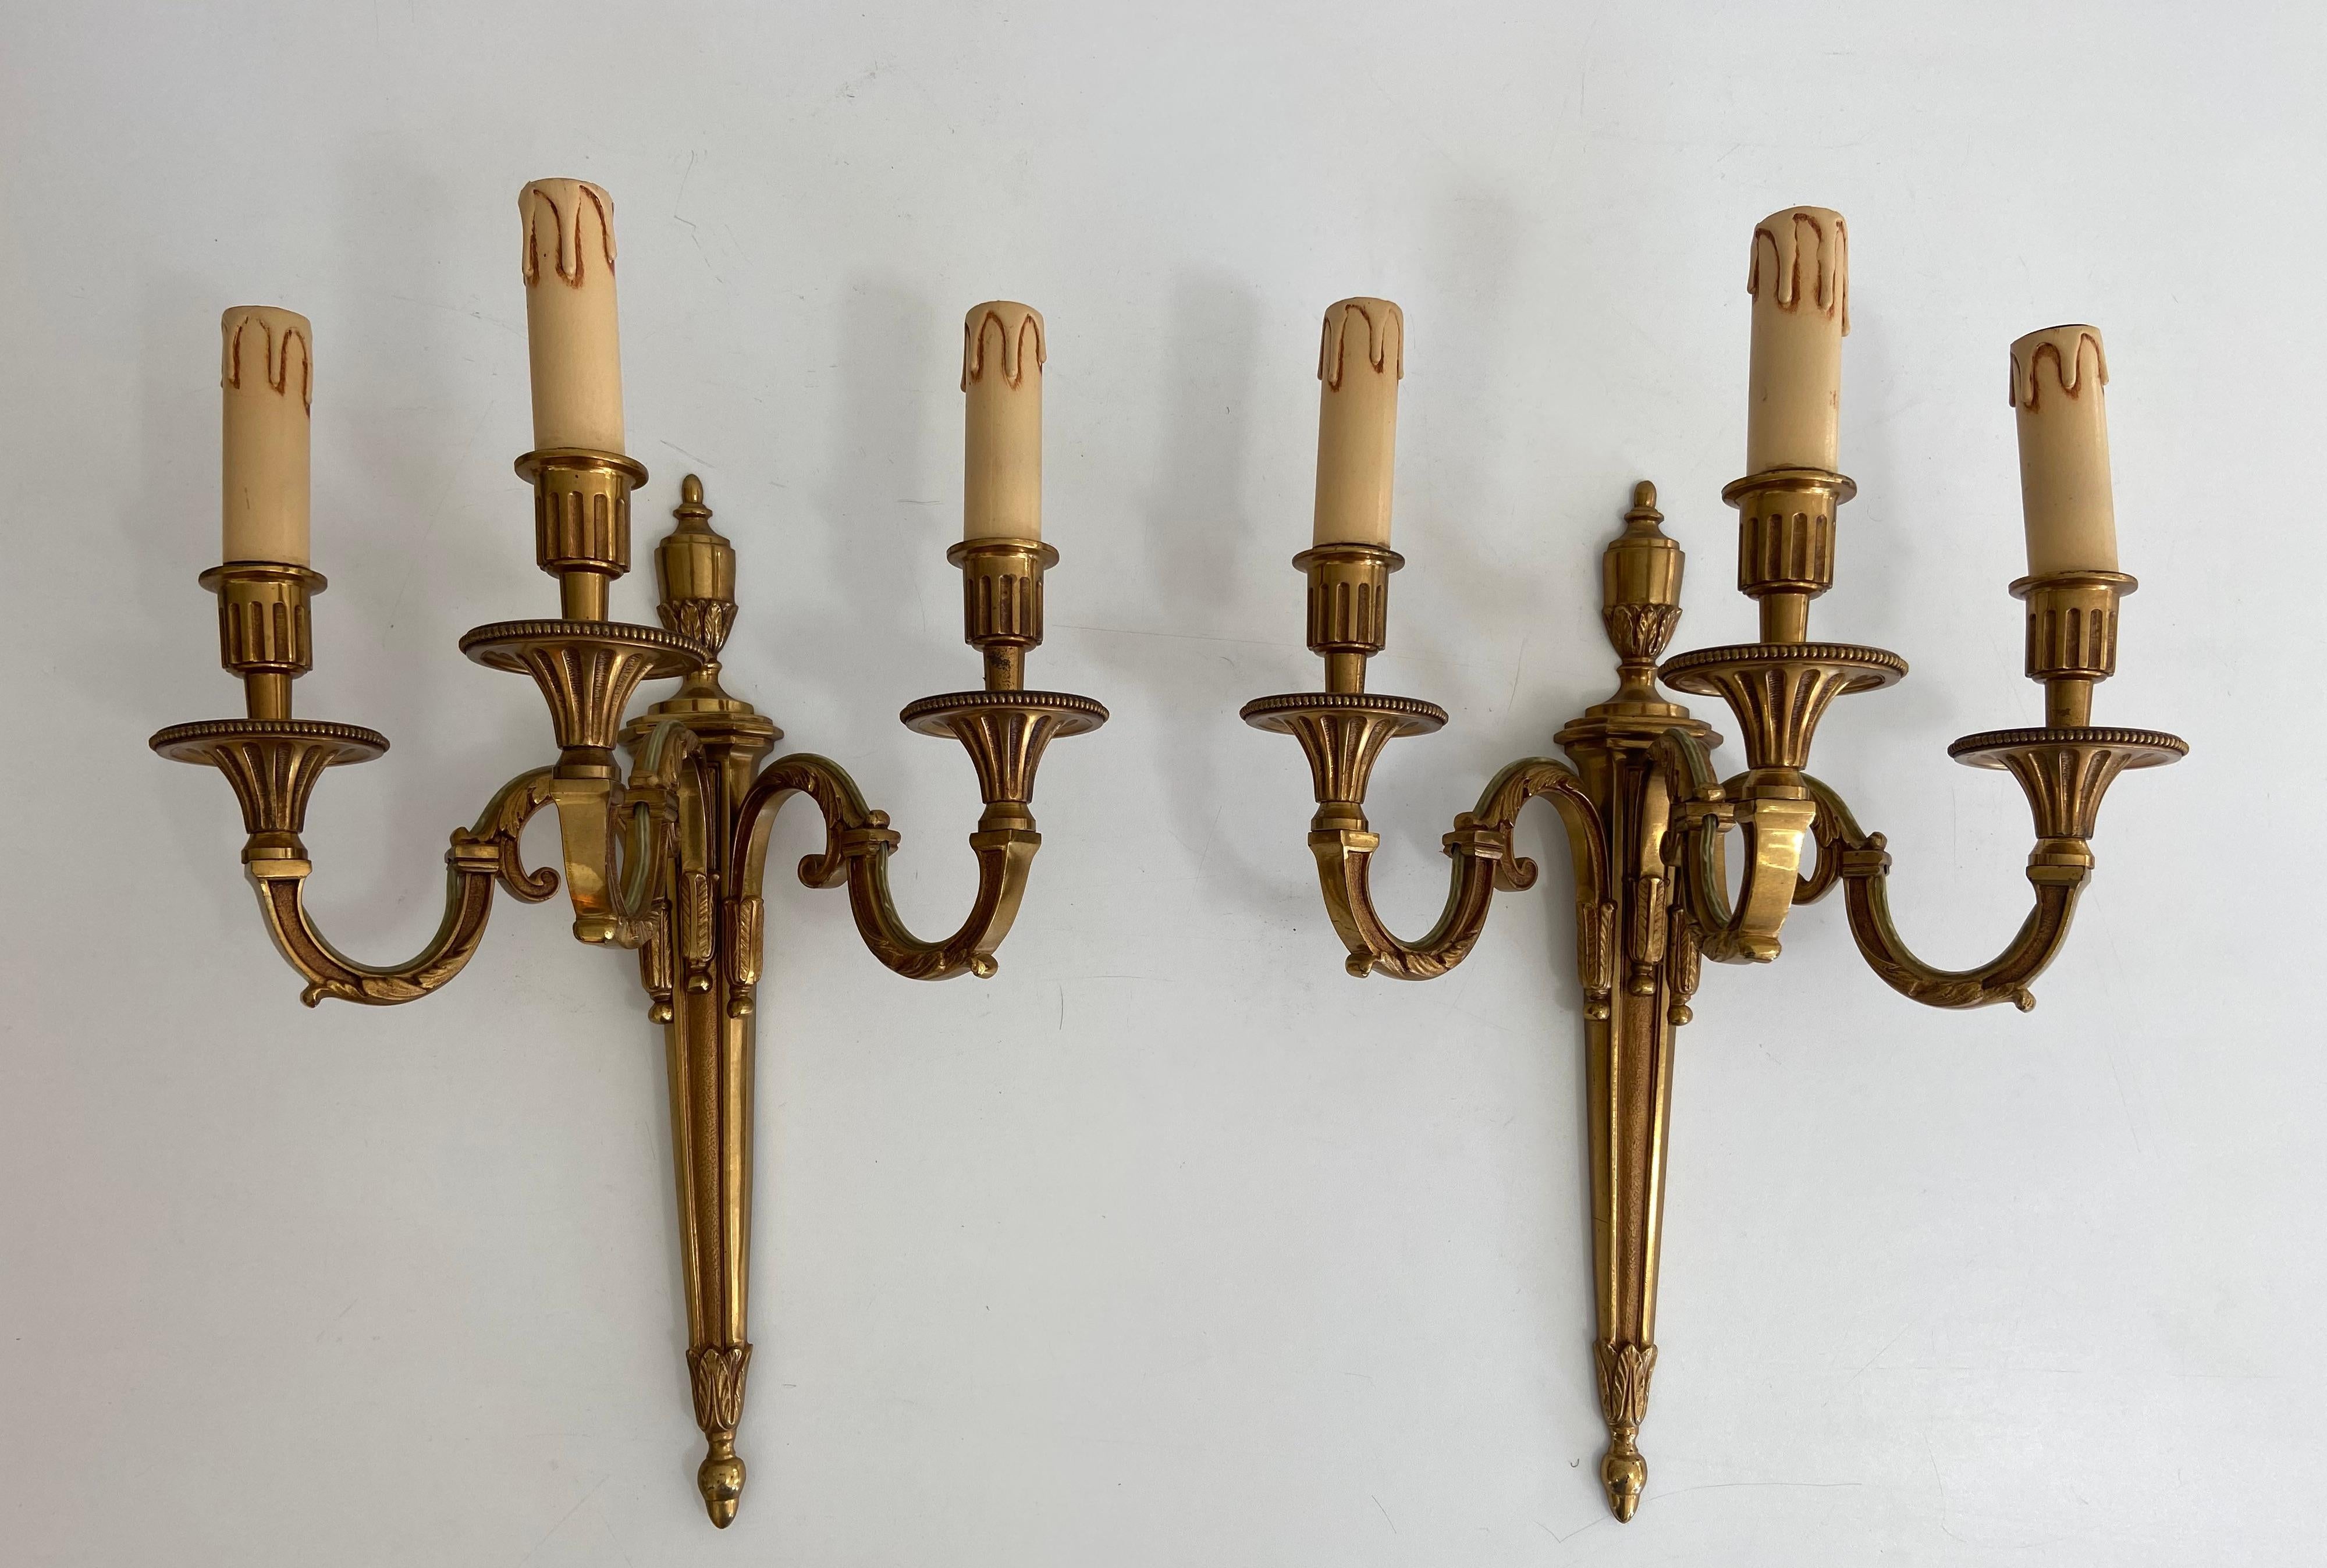 This pair of Louis the 16th style 3 arms wall lights are made of bronze. This is a French work by Maison Lucien Gau. Circa 1950.